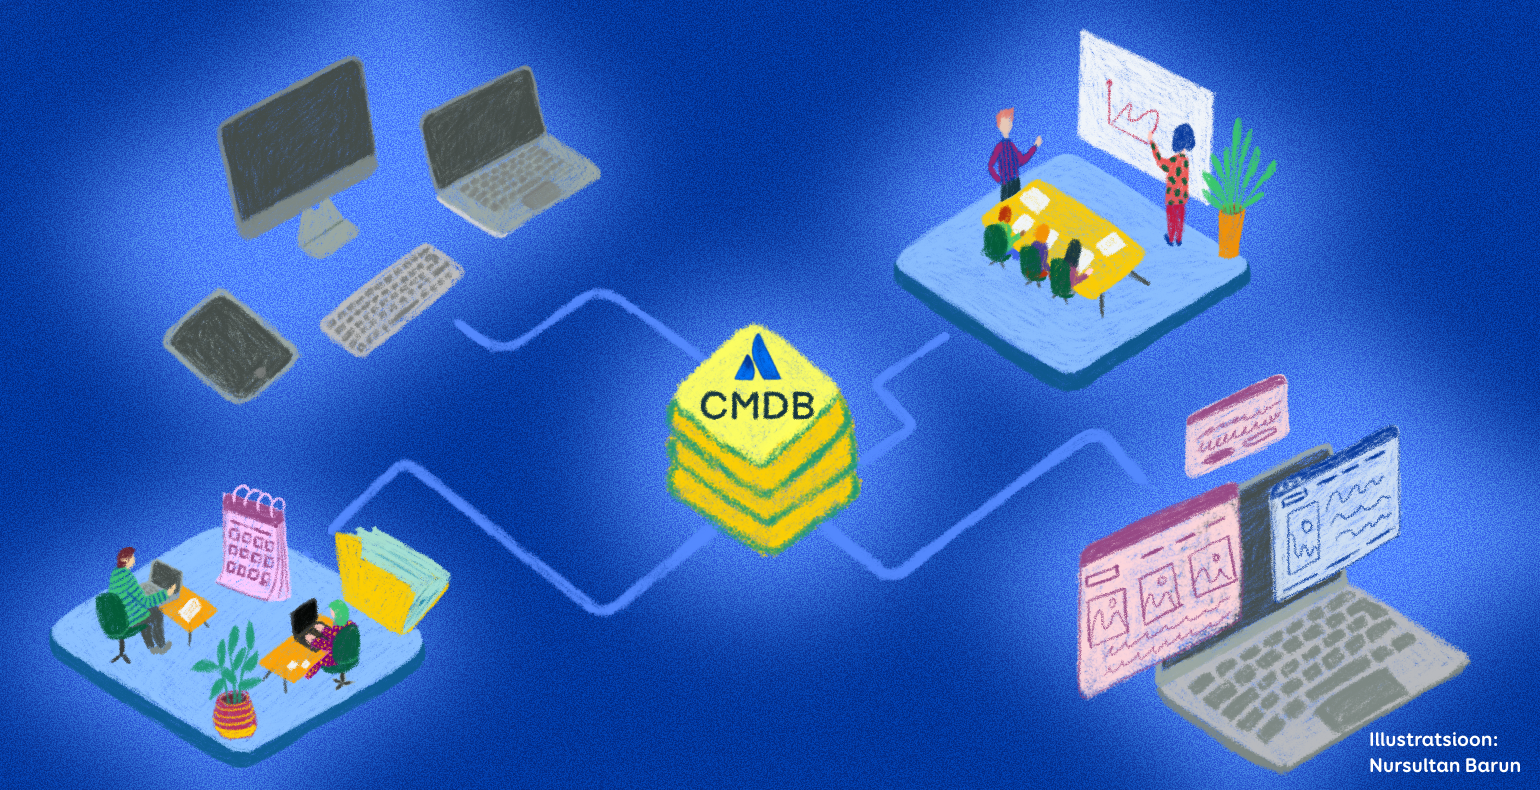 Depiction of a CMDB serving as a central hub connecting assets, services, and teams.